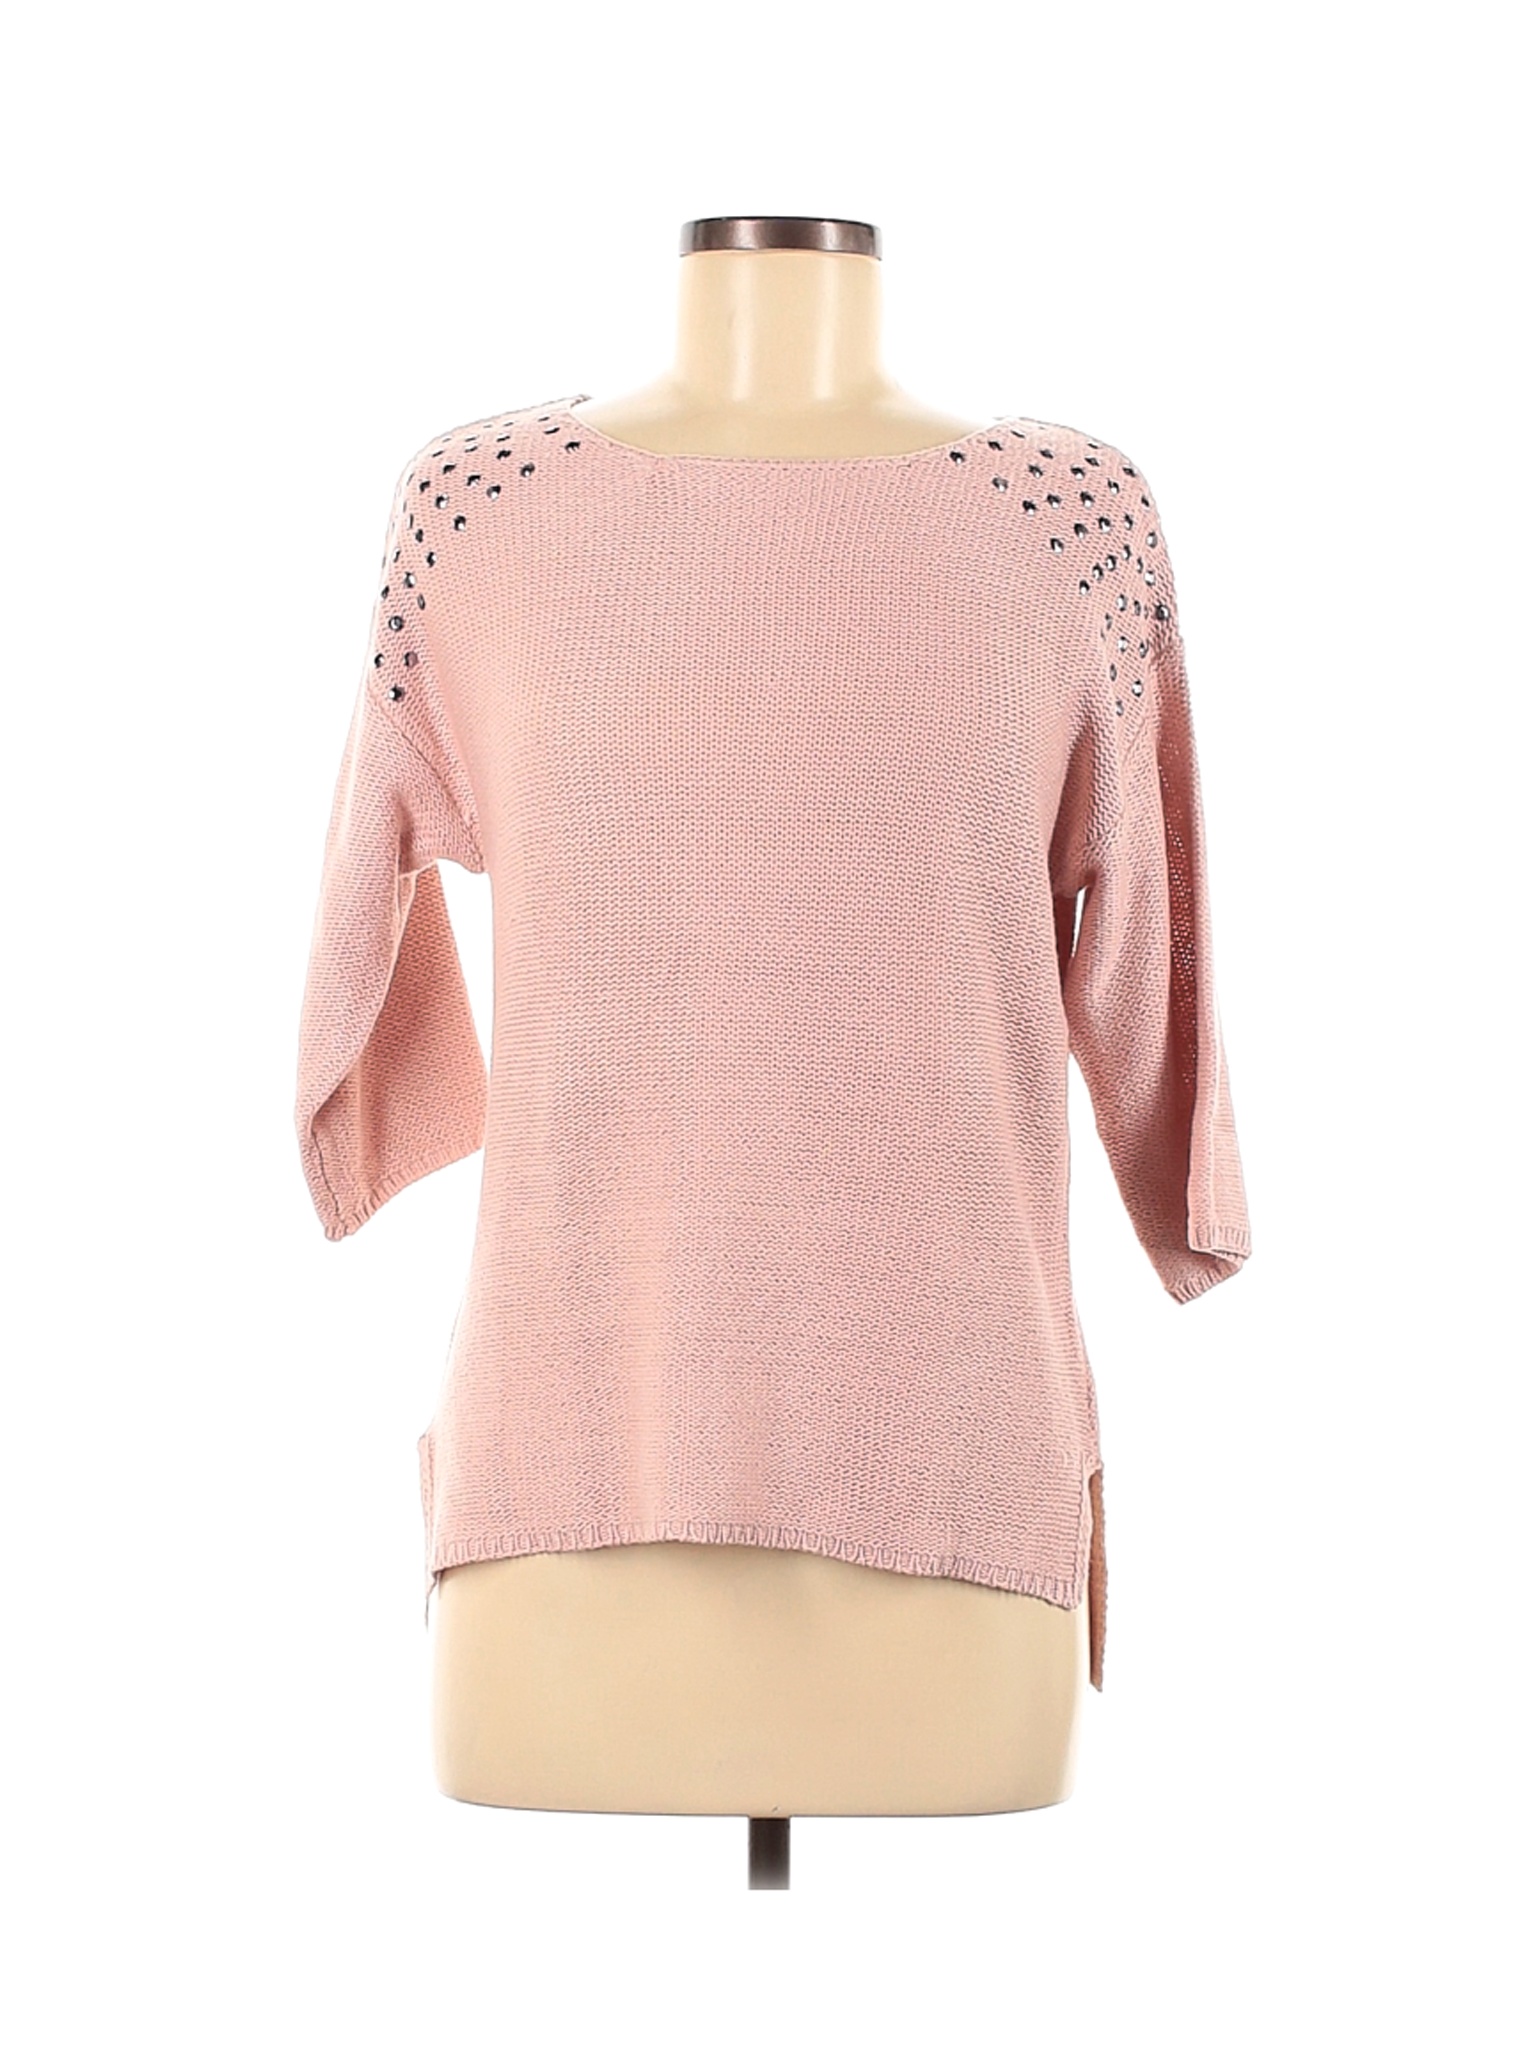 NY Collection Women Pink Pullover Sweater M | eBay